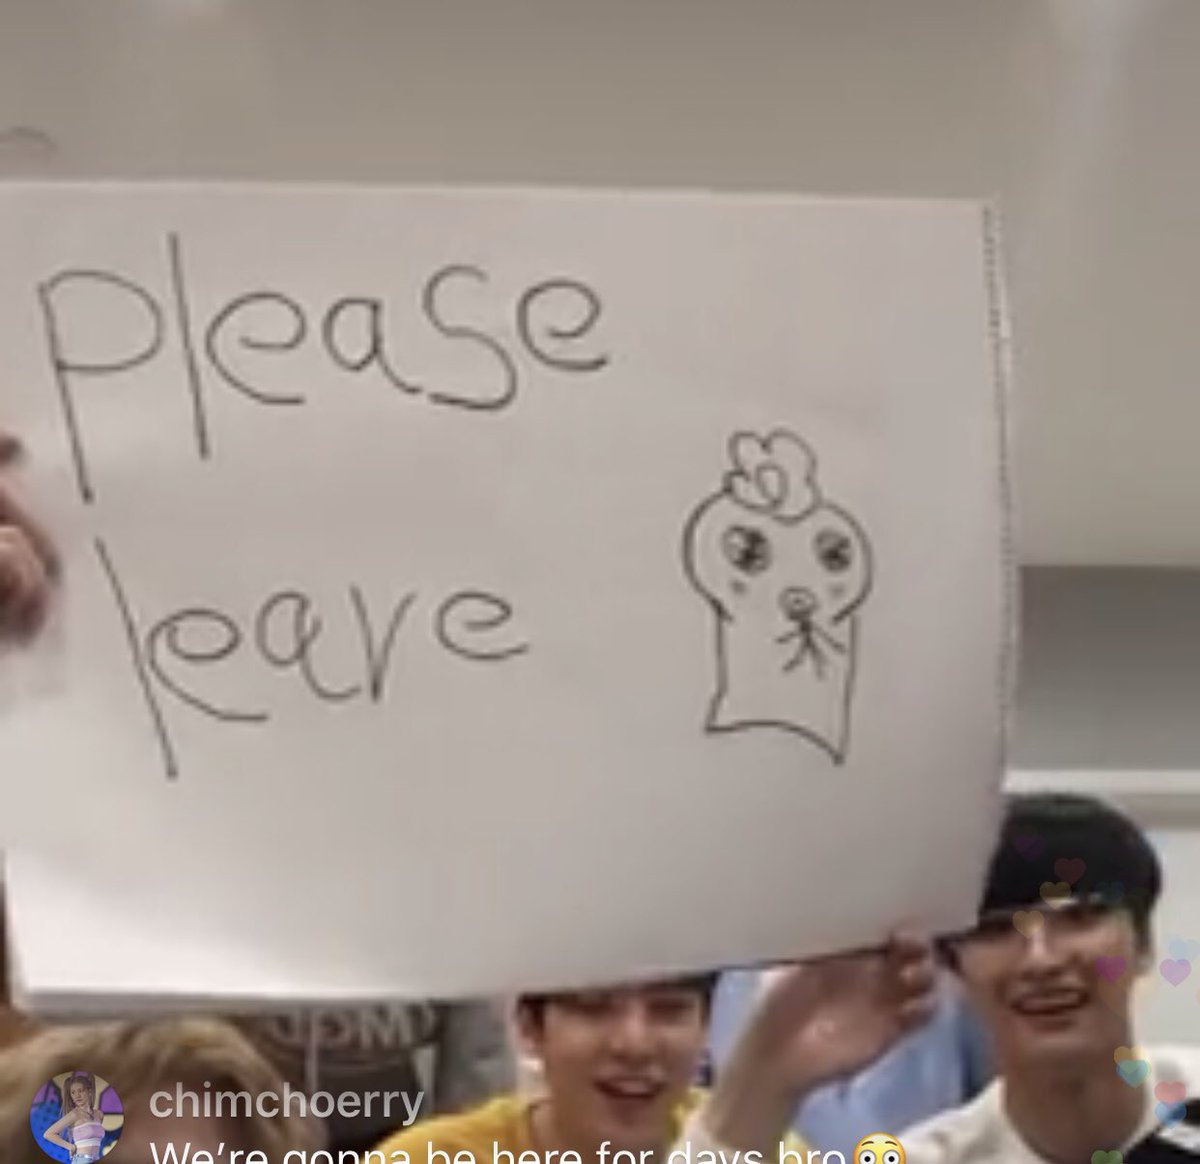 their goal was to have only 82 viewers in the livestream for 82 seconds but people wouldn’t leave so yeosang just